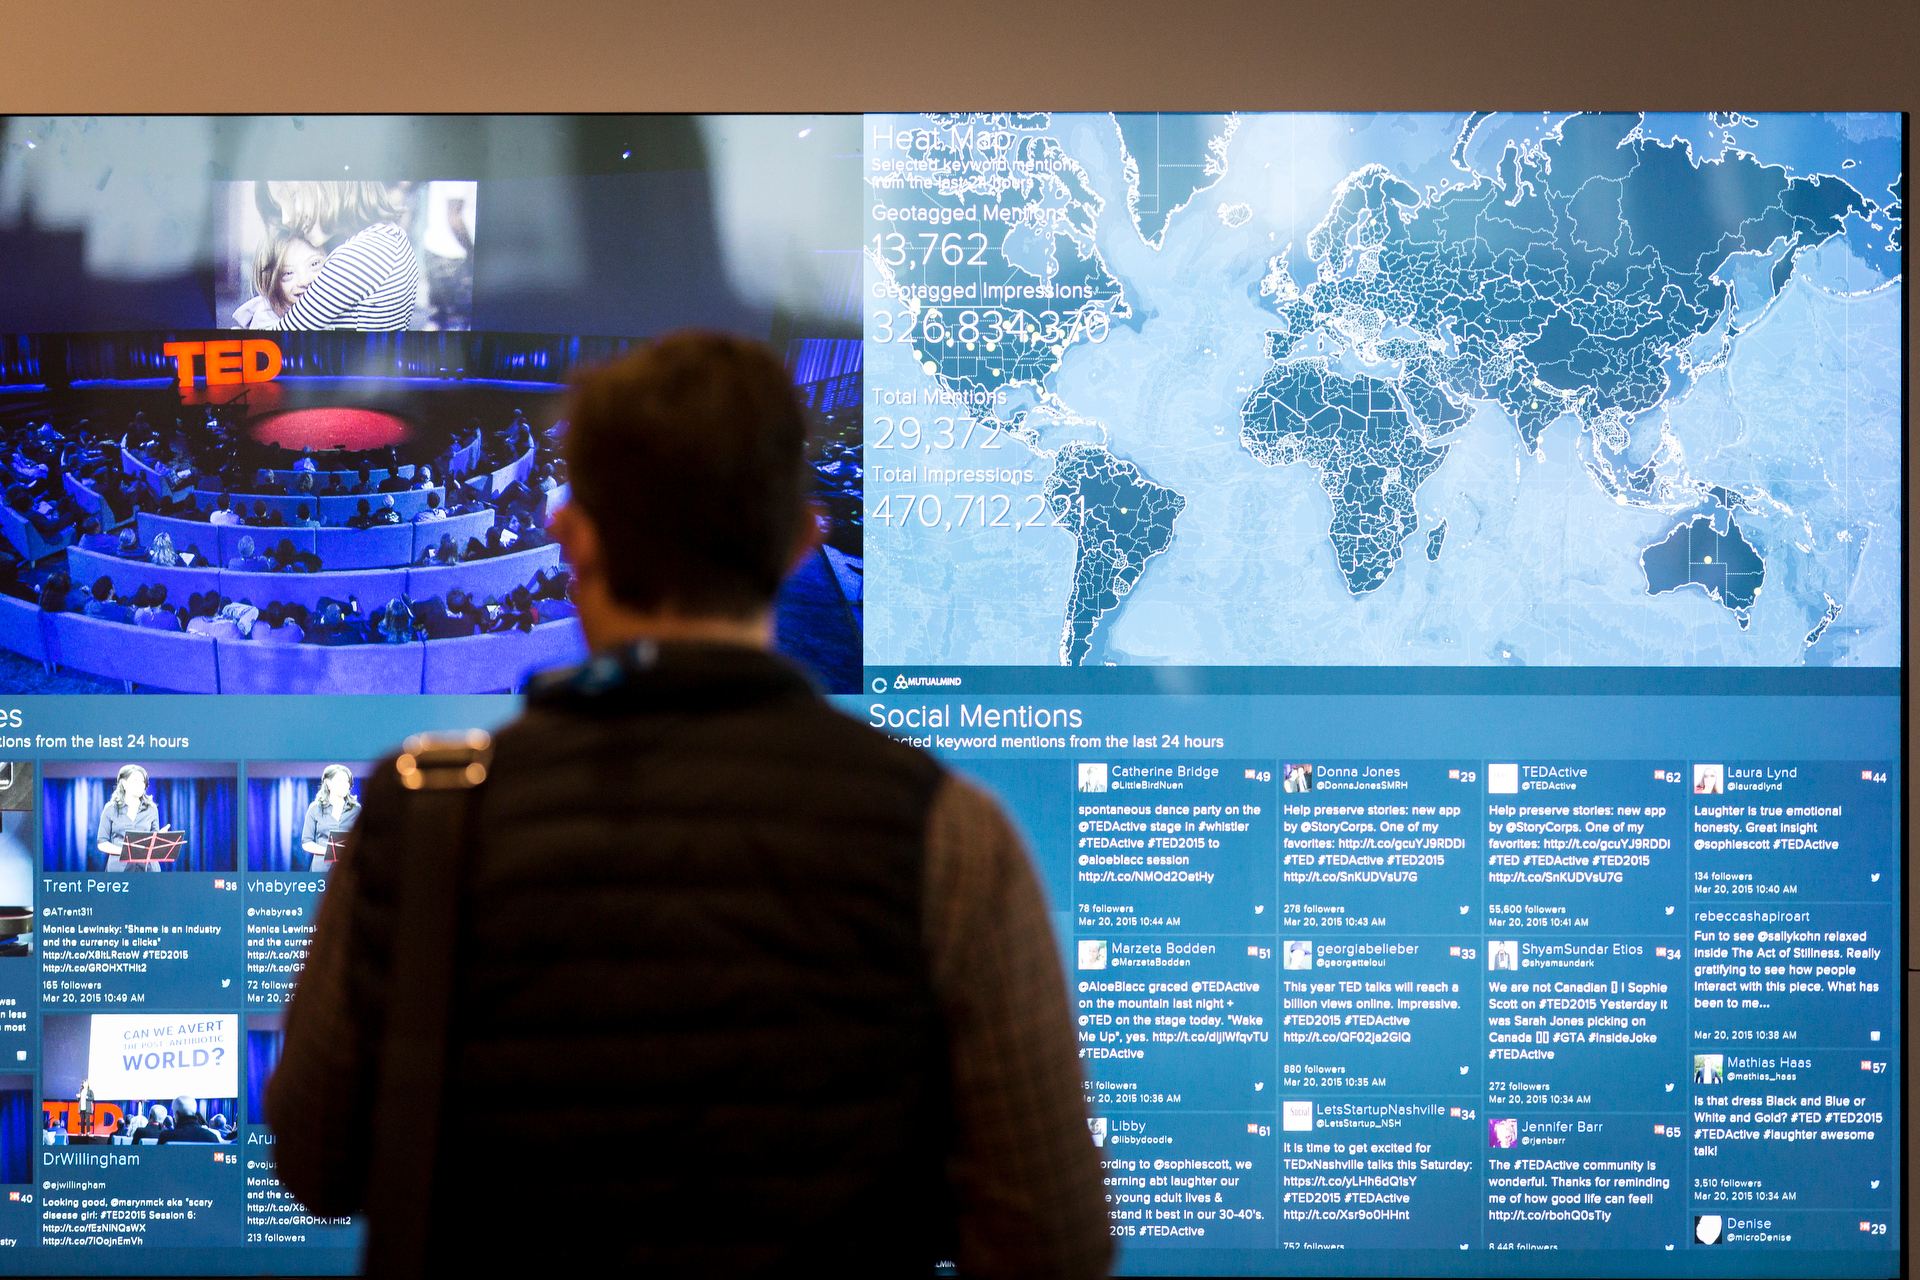 At the IBM Engagement Center, attendees could dig into real-time data about the conference aggregated from social media. They could see what words people were tweeting, where they were tweeting them from and, perhaps most intriguingly, who was tweeting the most like them. Photo: Ryan Lash/TED